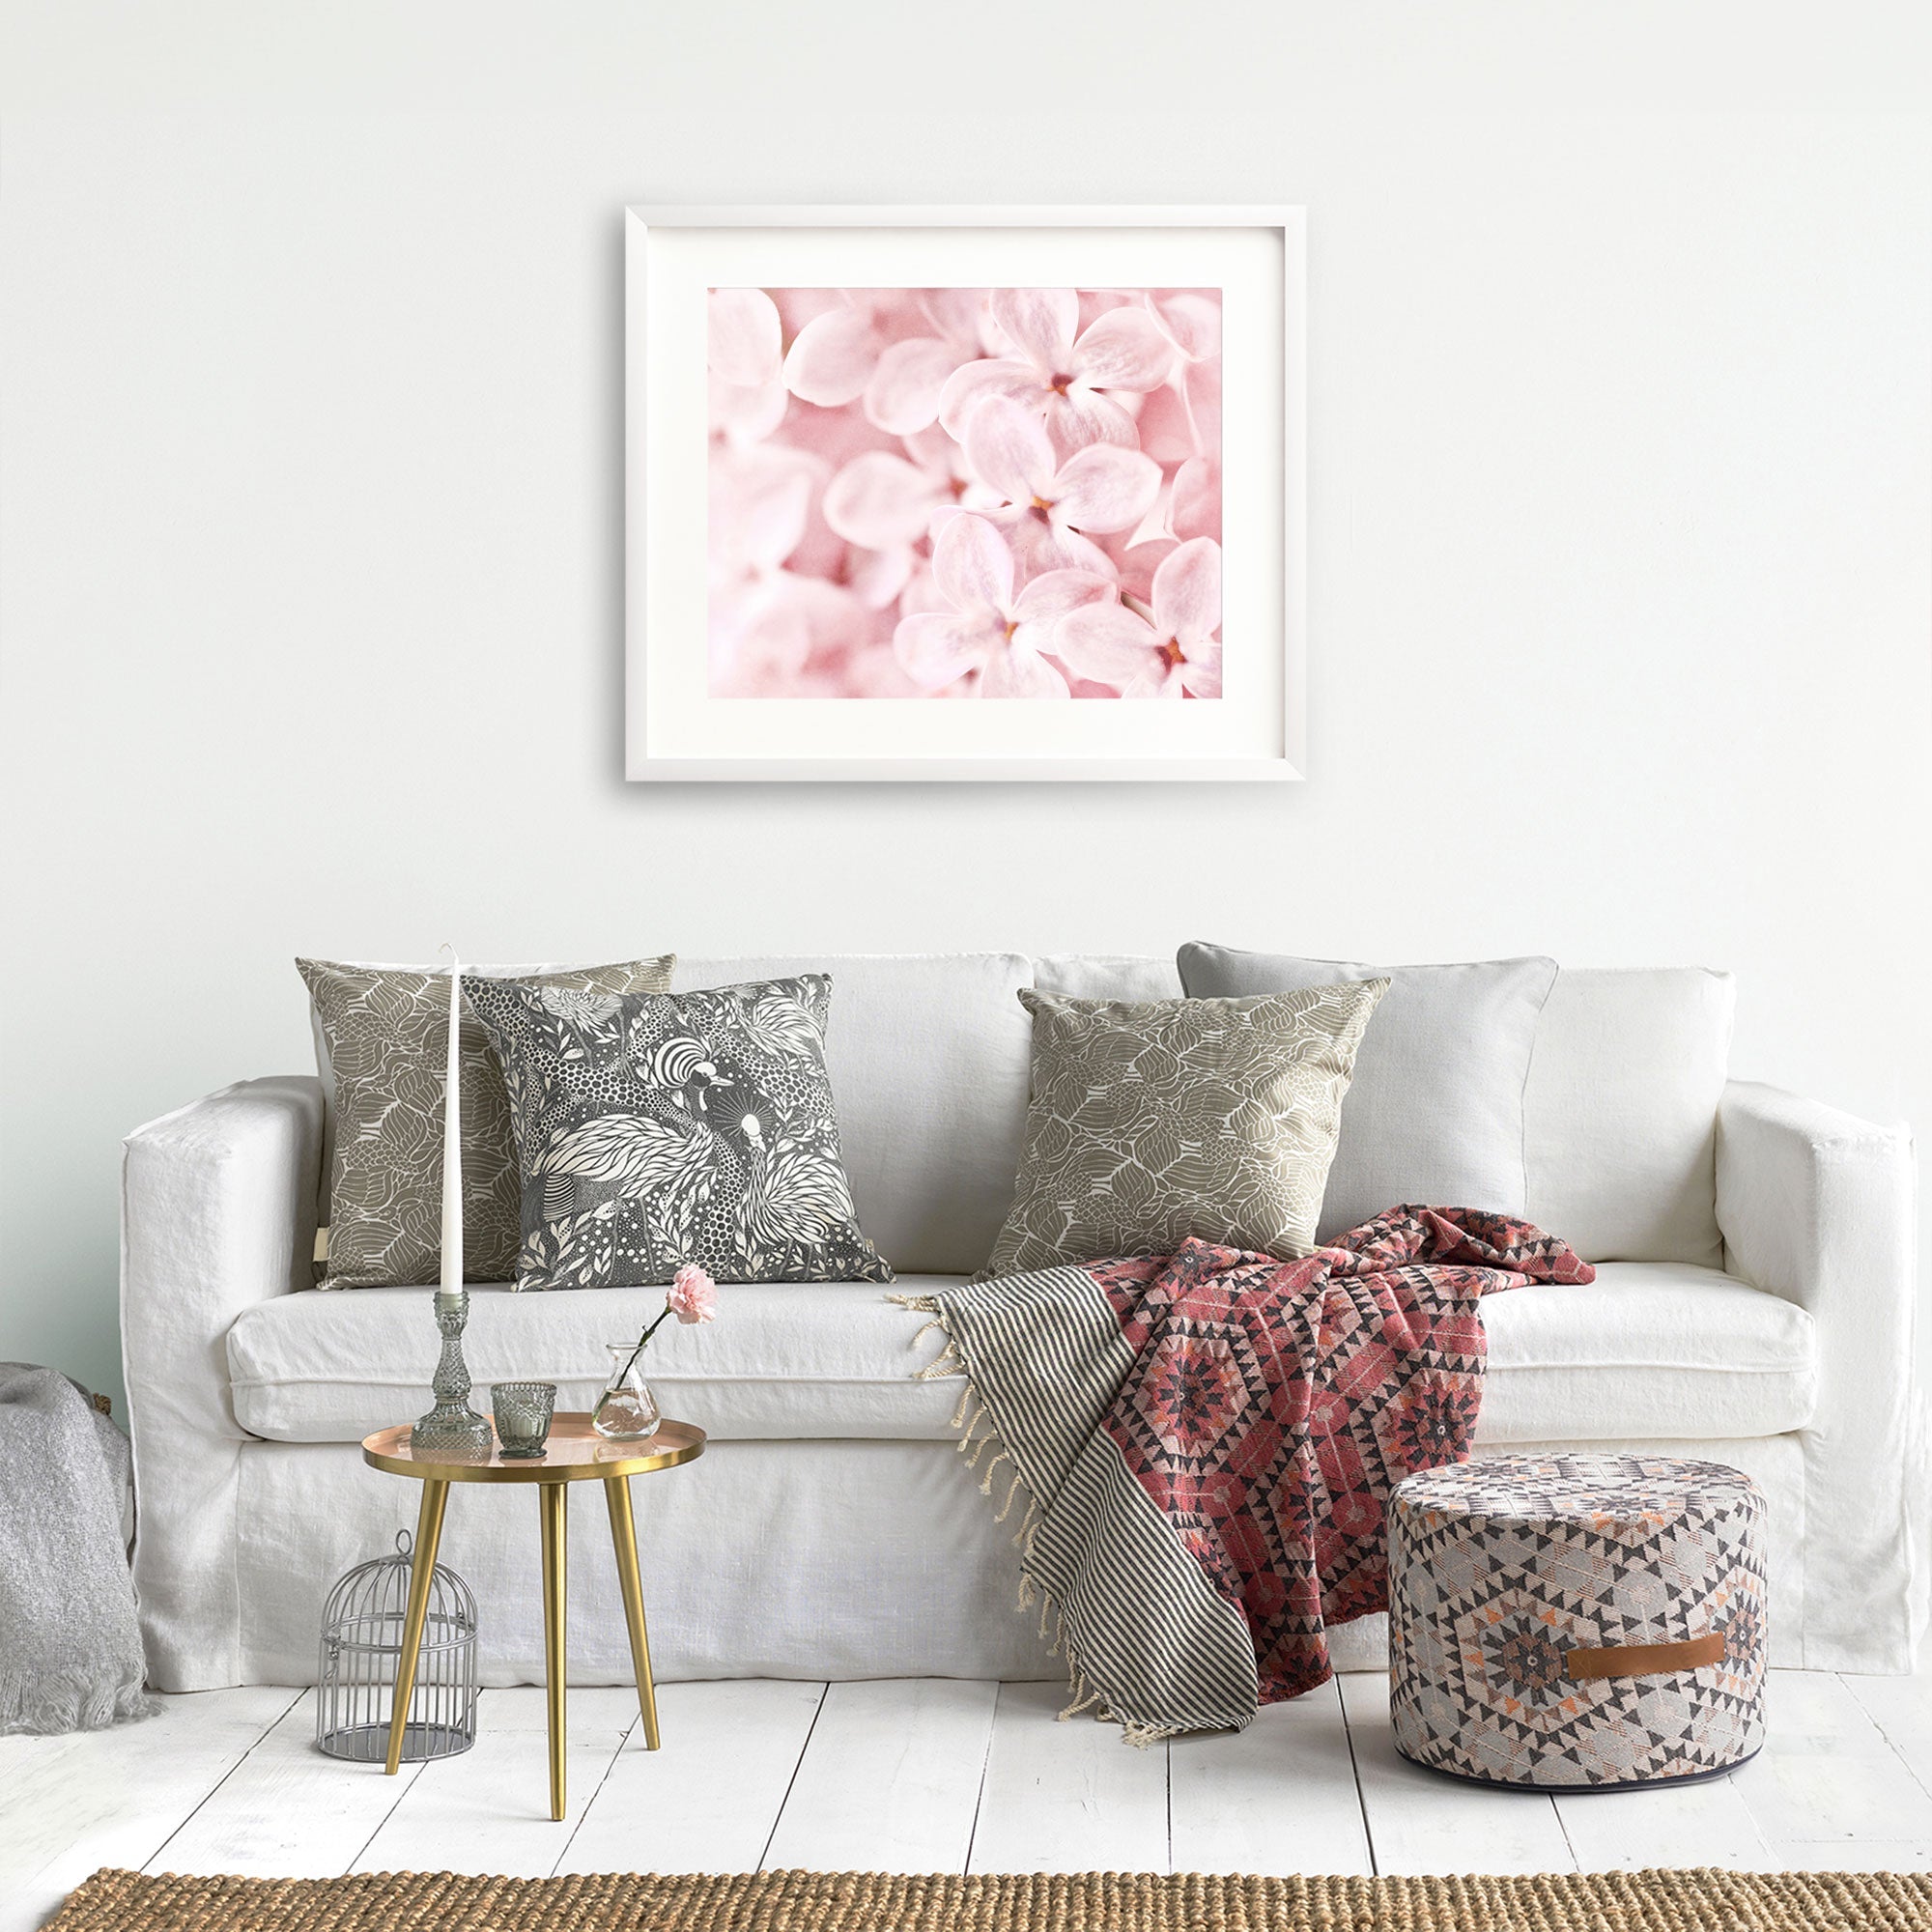 A cozy living room setup with a white sofa adorned with various patterned cushions, a knit throw blanket, and a small golden side table with decorative items, under Offley Green's Pink Botanical Print, 'Bed of Lilacs'.